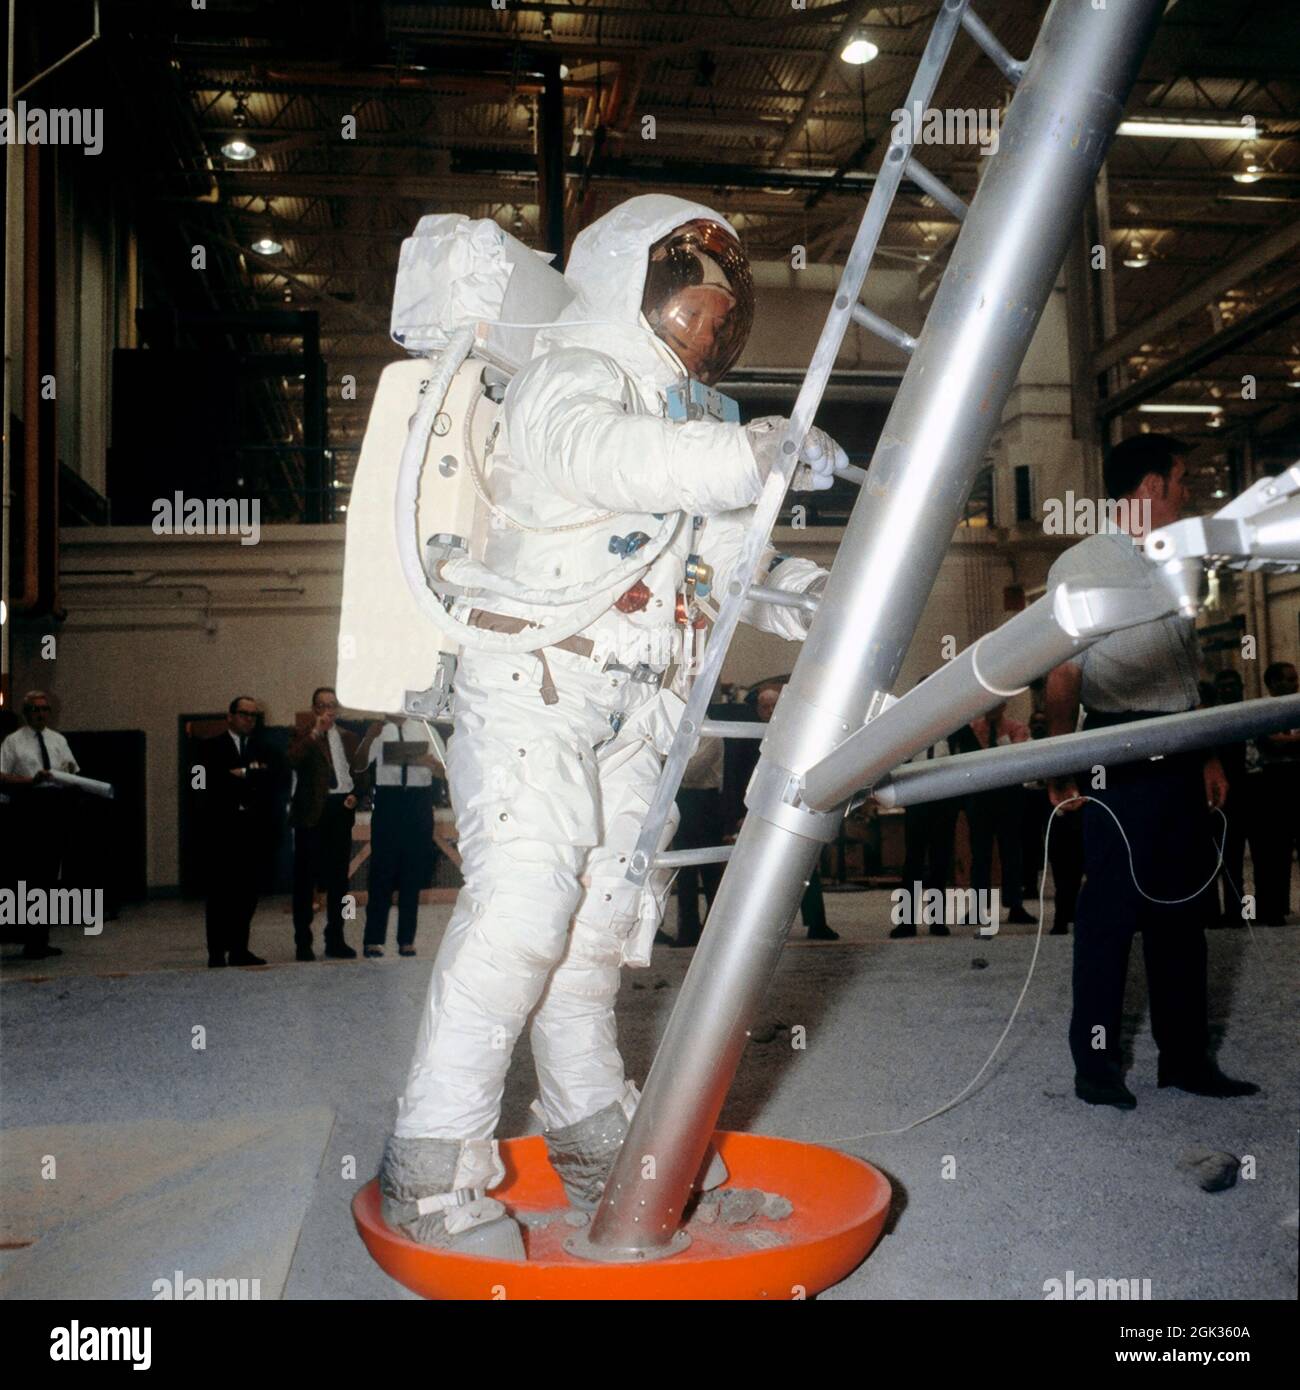 (18 April 1969) --- Suited astronaut Neil A. Armstrong, wearing an Extravehicular Mobility Unit (EMU), participates in lunar surface simulation training on April 18, 1969, in Building 9, Manned Spacecraft Center (MSC). Armstrong is the prime crew commander of the Apollo 11 lunar landing mission. Here, he is standing on Lunar Module (LM) mockup foot pad preparing to ascend steps Stock Photo